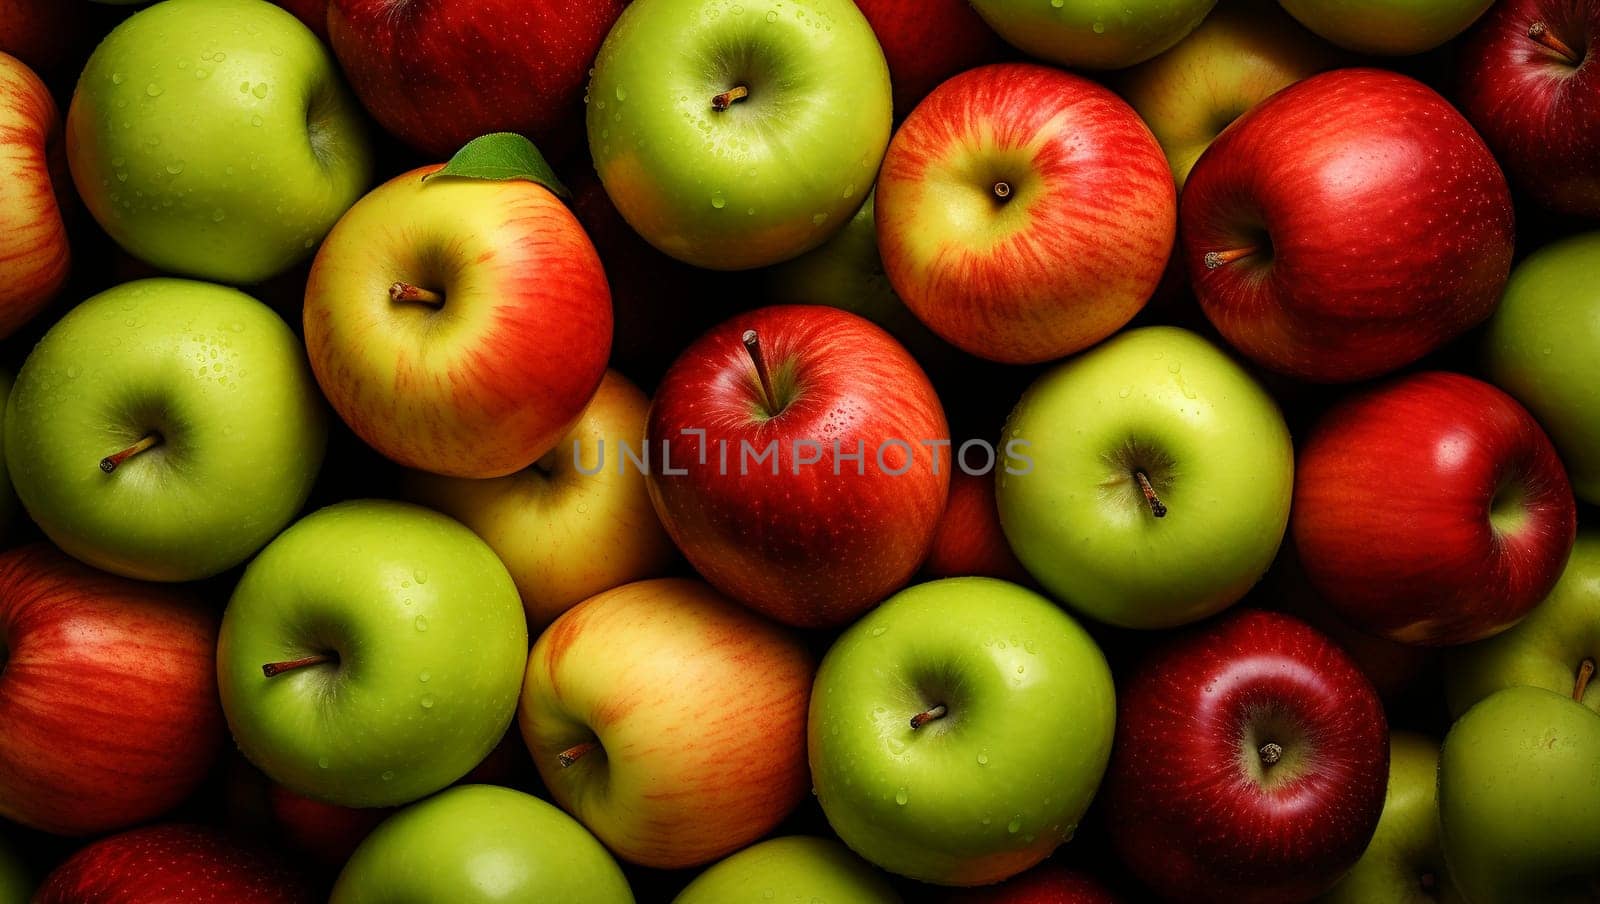 Red and green apples. Background of ripe apples. by Sneznyj